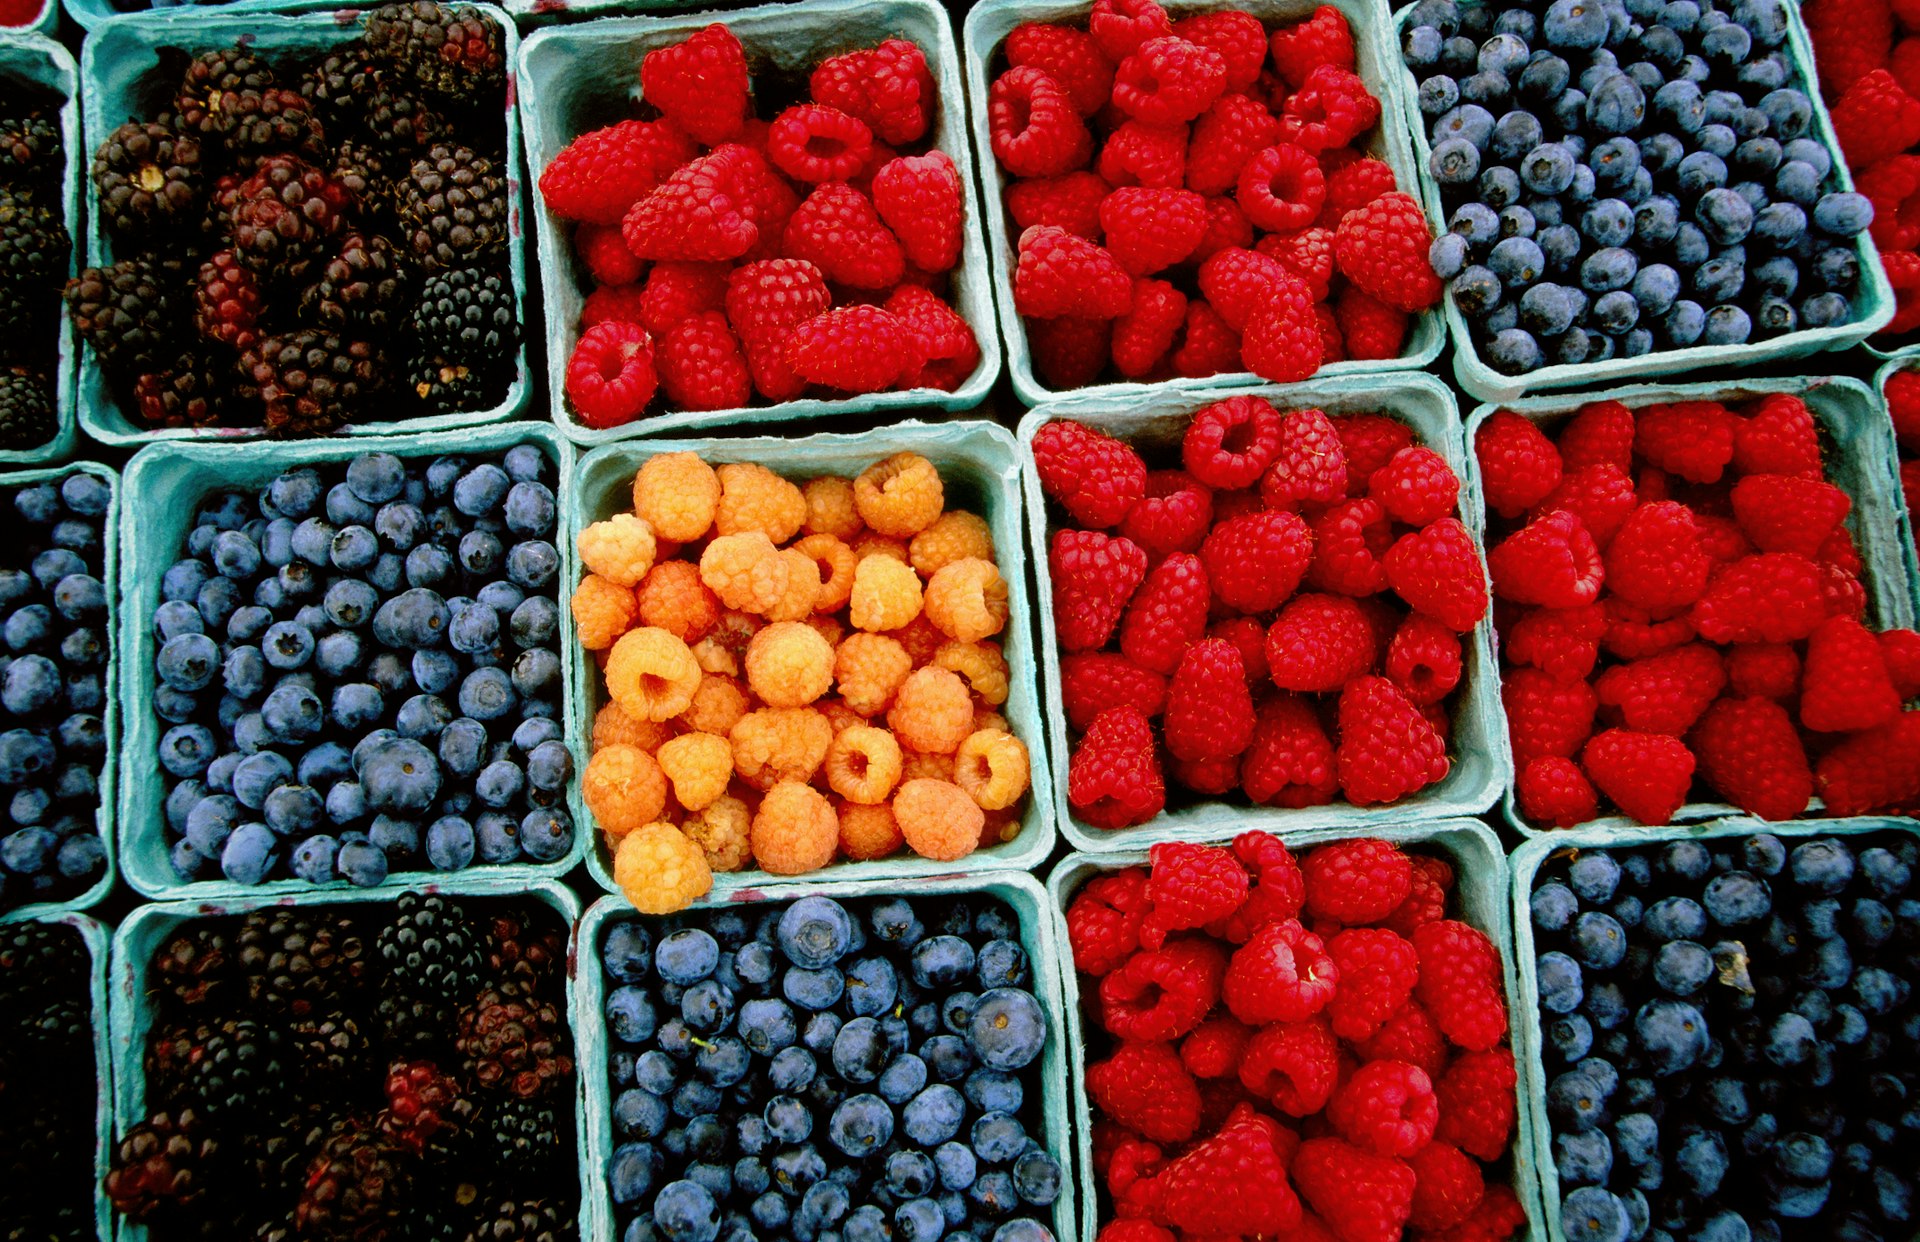 Raspberry, blueberry and blackberry punnets at Farmers Market.